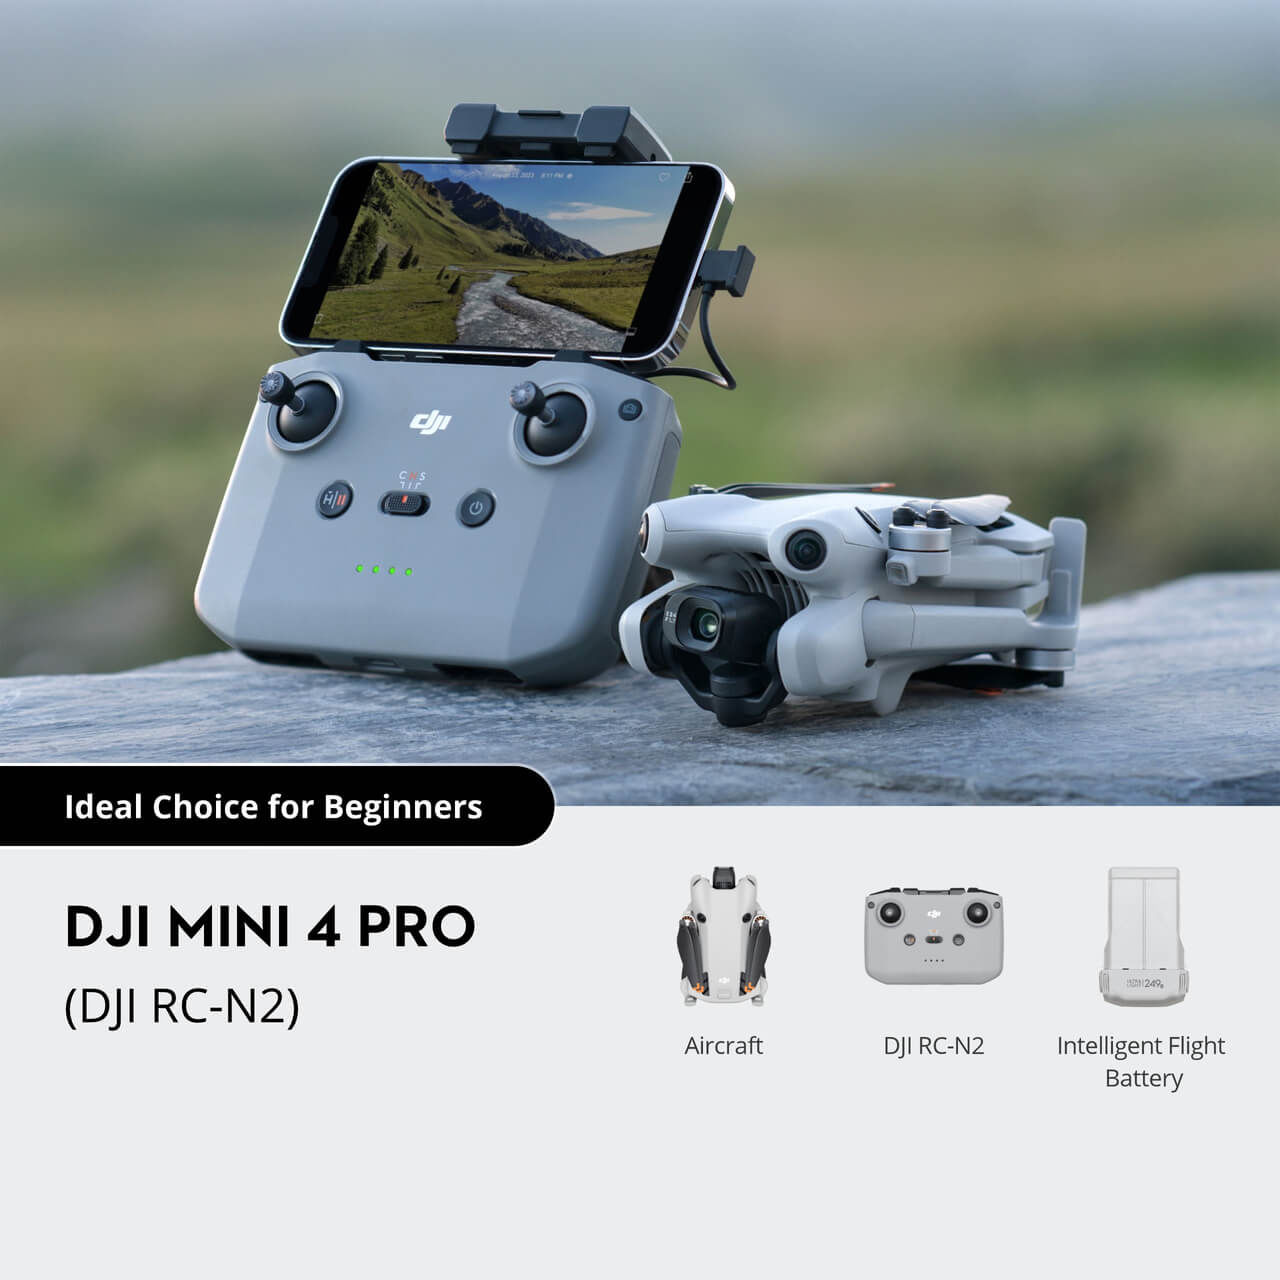 The DJI Mini 4 Pro is the company's new drone with omnidirectional obstacle sensing